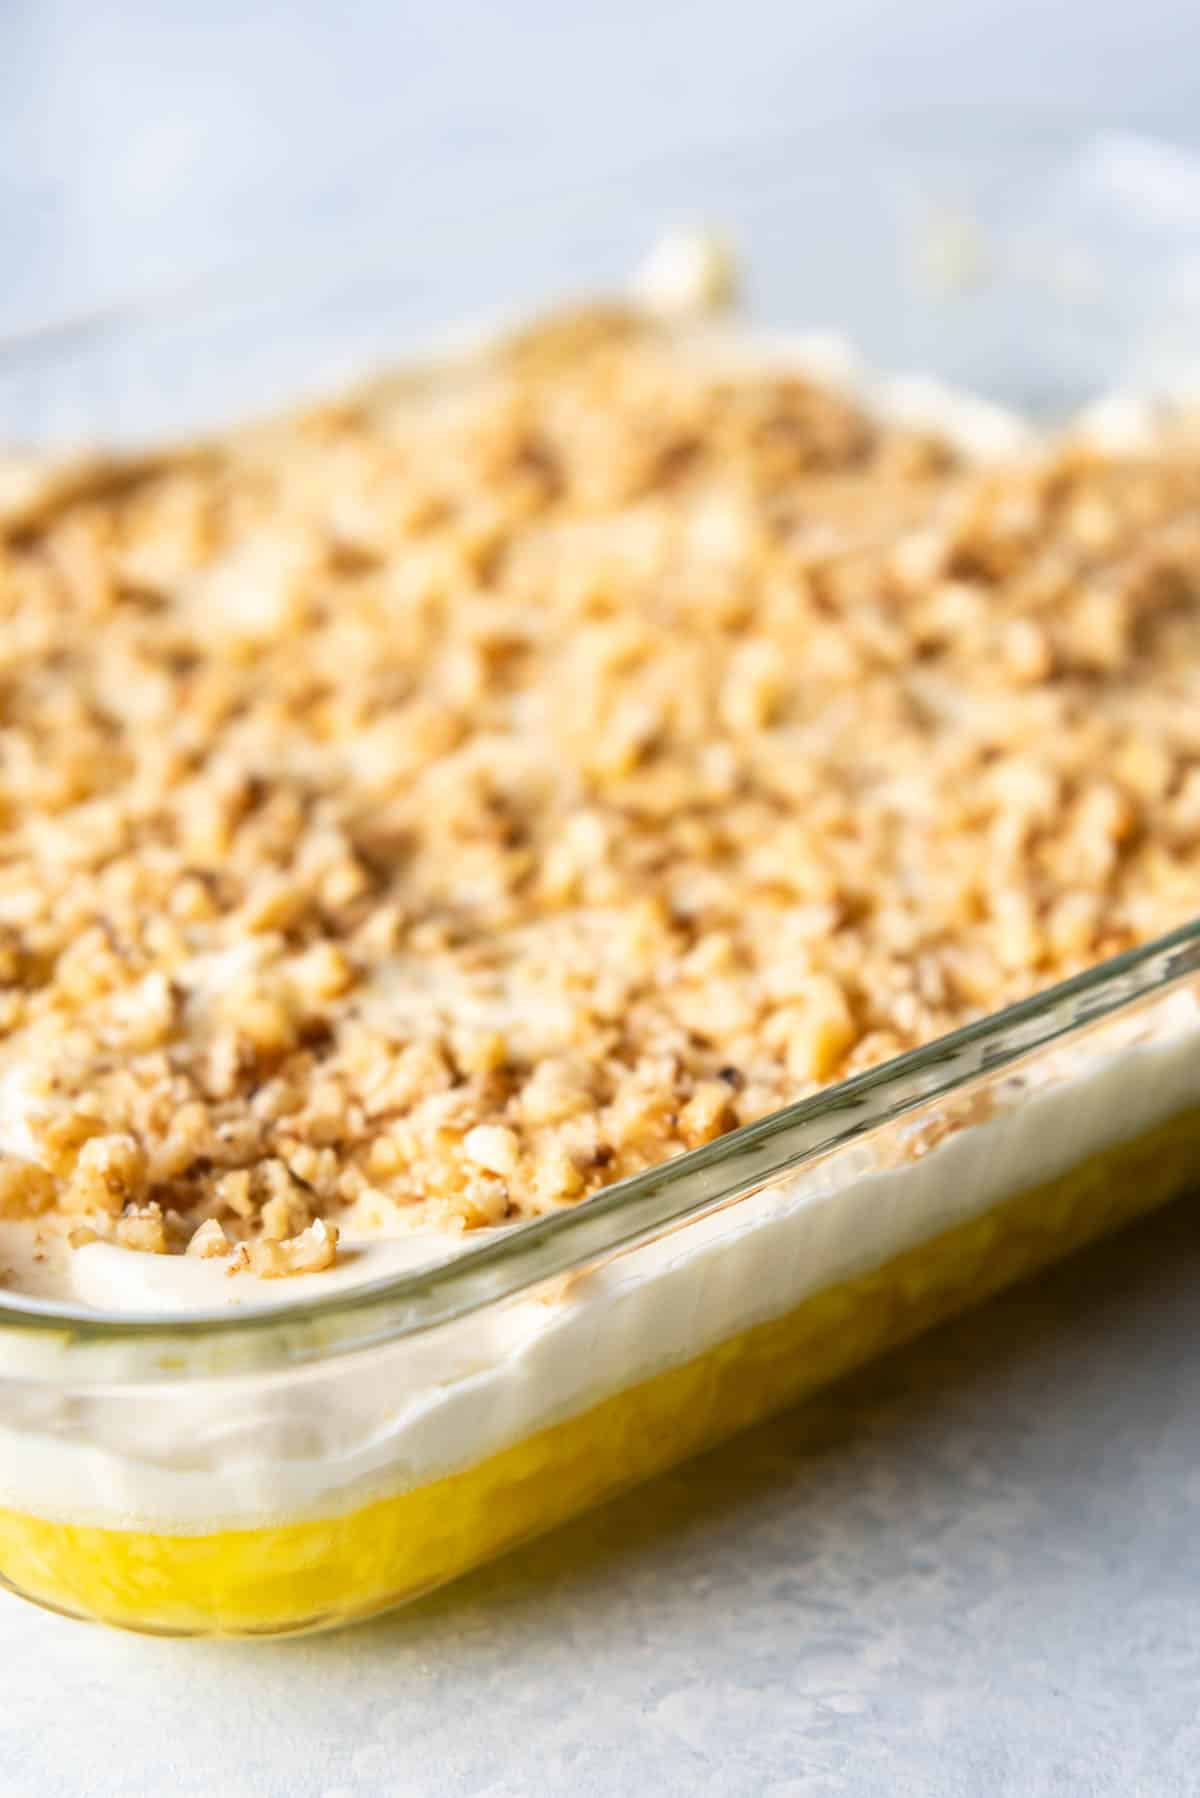 A side view of a lemon pineapple jello with whipped cream and chopped walnuts.